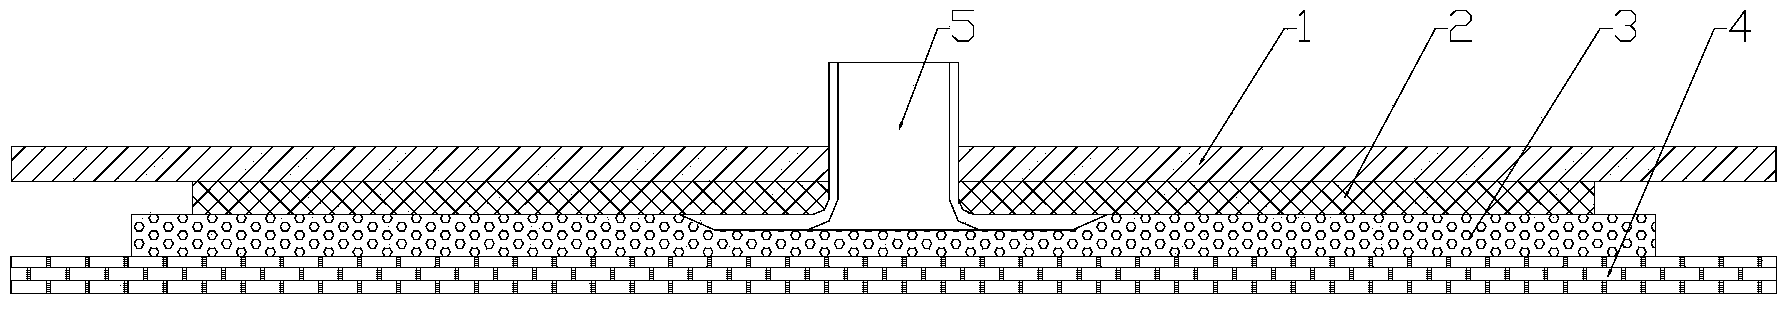 Injecting-type electrode plate used for electrical stimulation